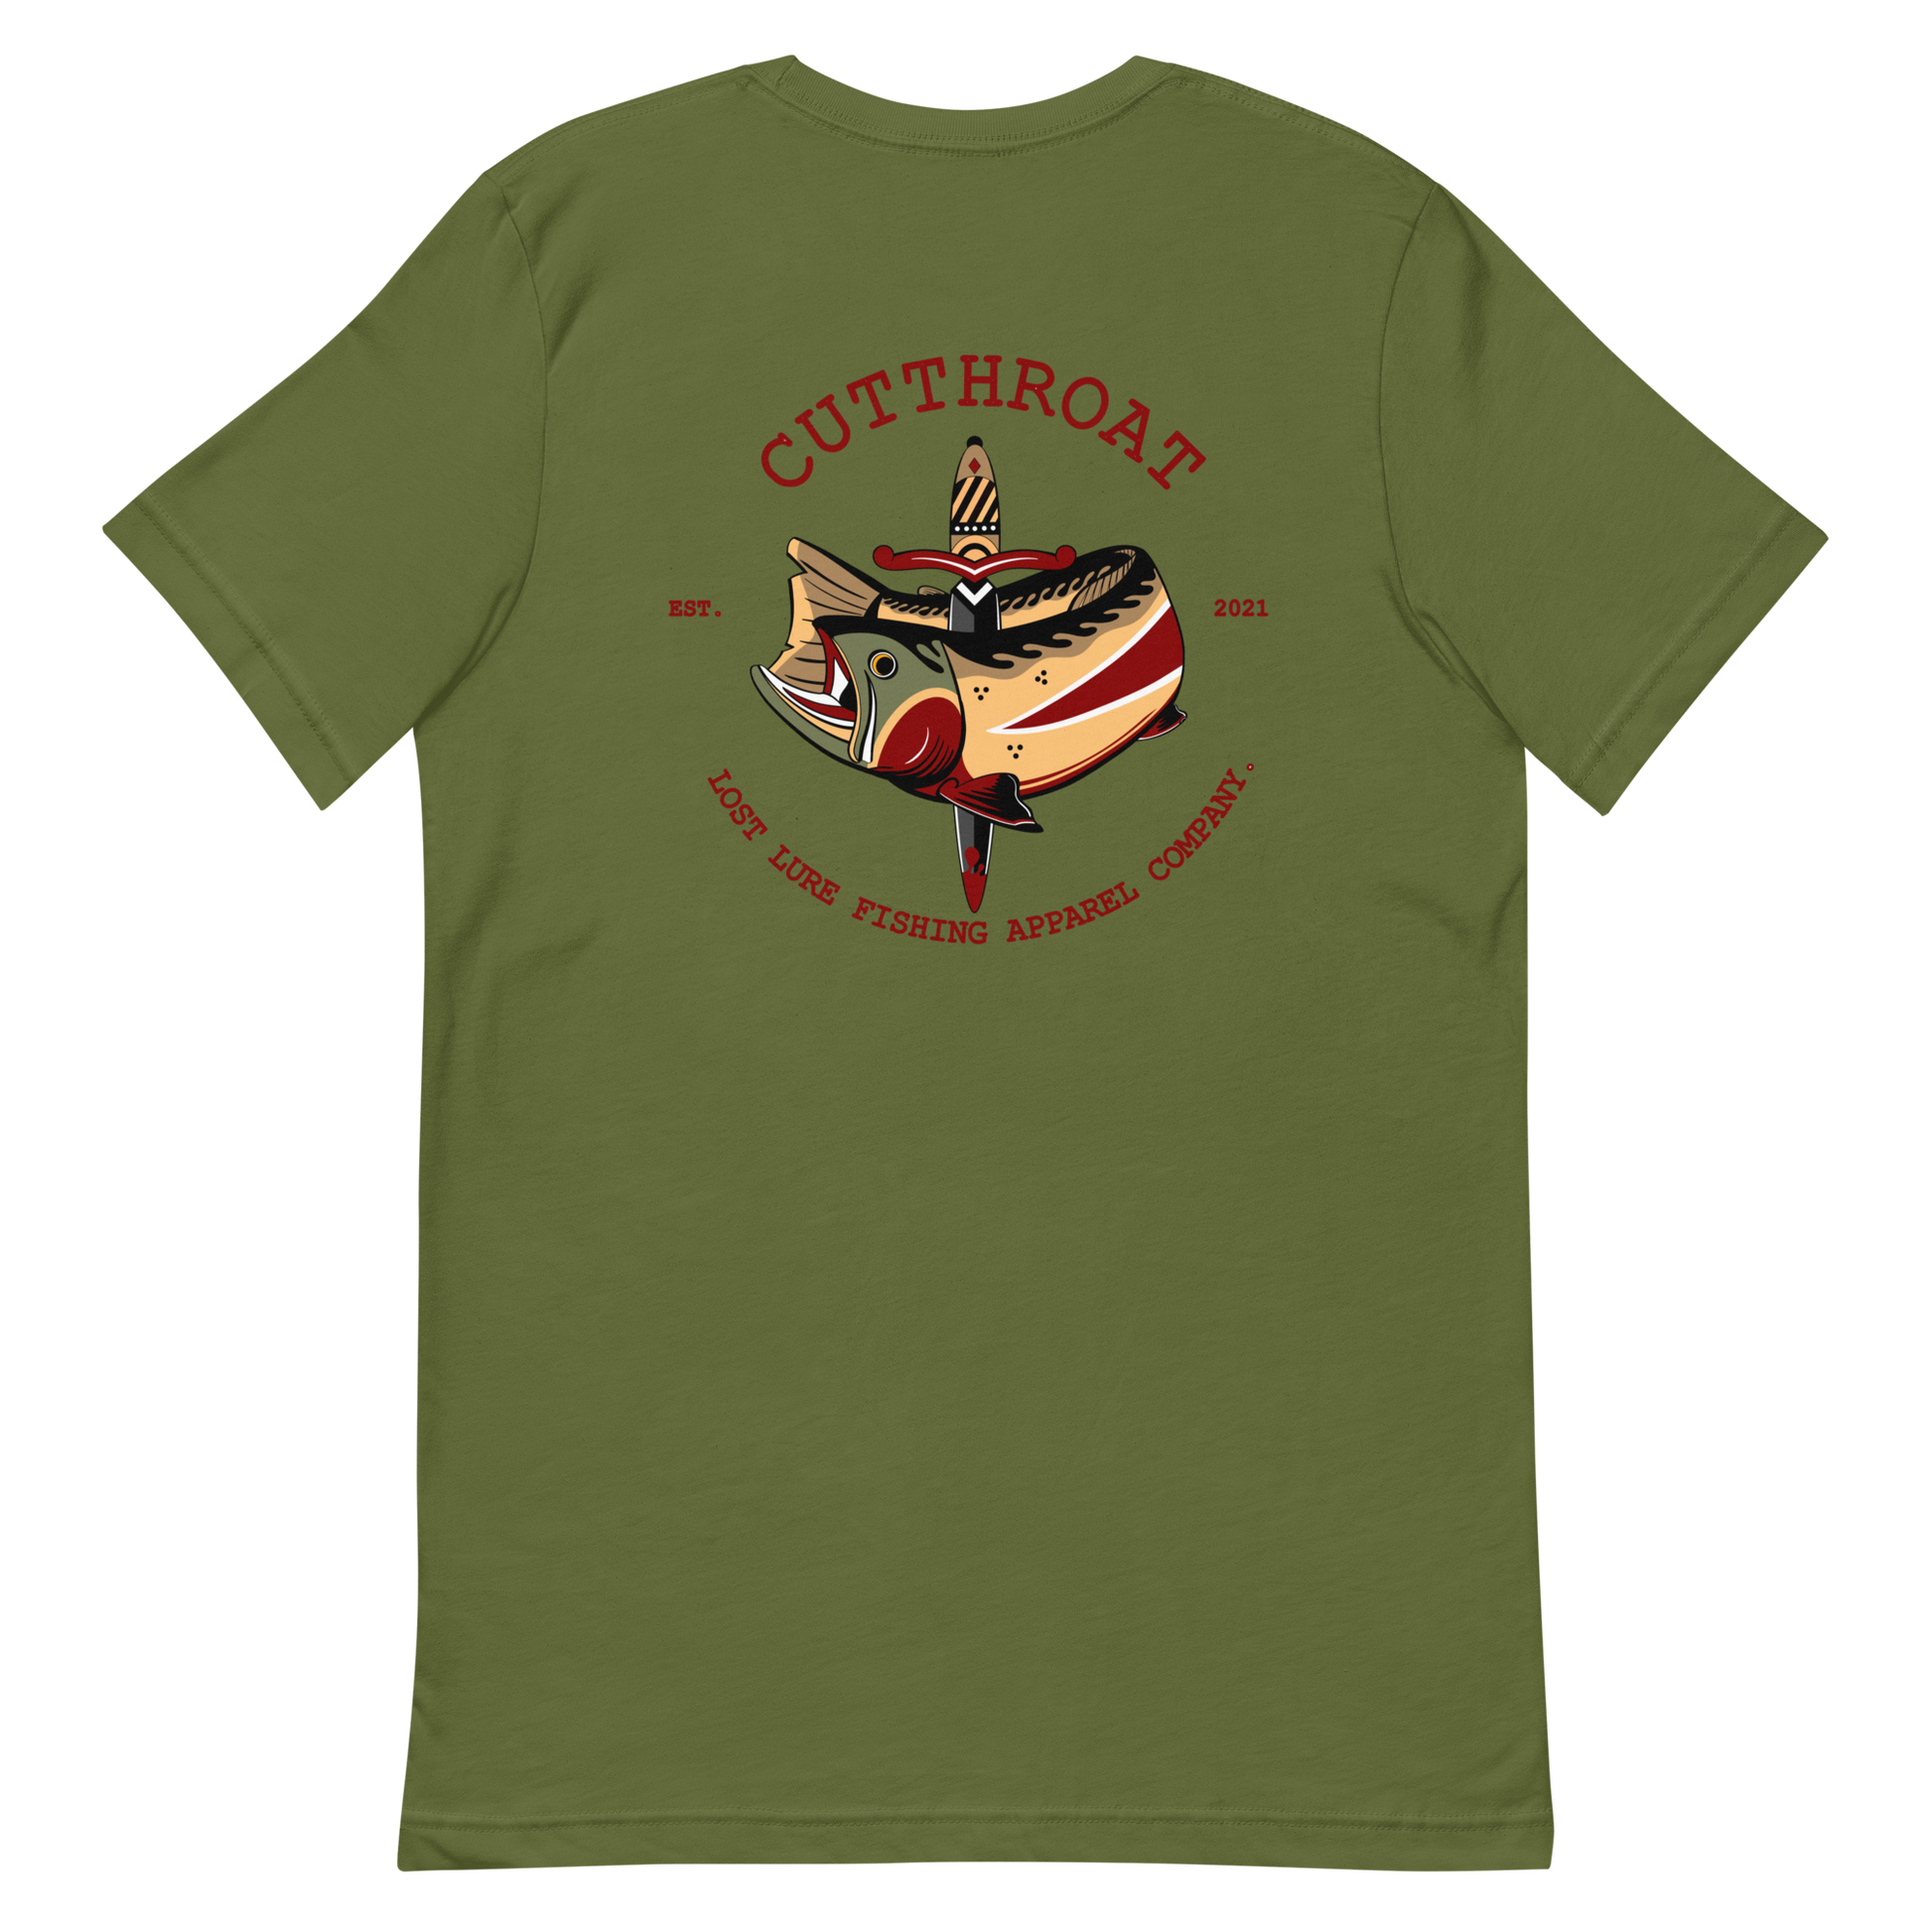 Cutthroat Trout fishing shirt. It’s an American traditional style design with a cutthroat trout and a dagger. The shirt reads Cutthroat trout, est. 2021, lost lure fishing apparel company. The front of the shirt has the lost lure logo. Green, back side